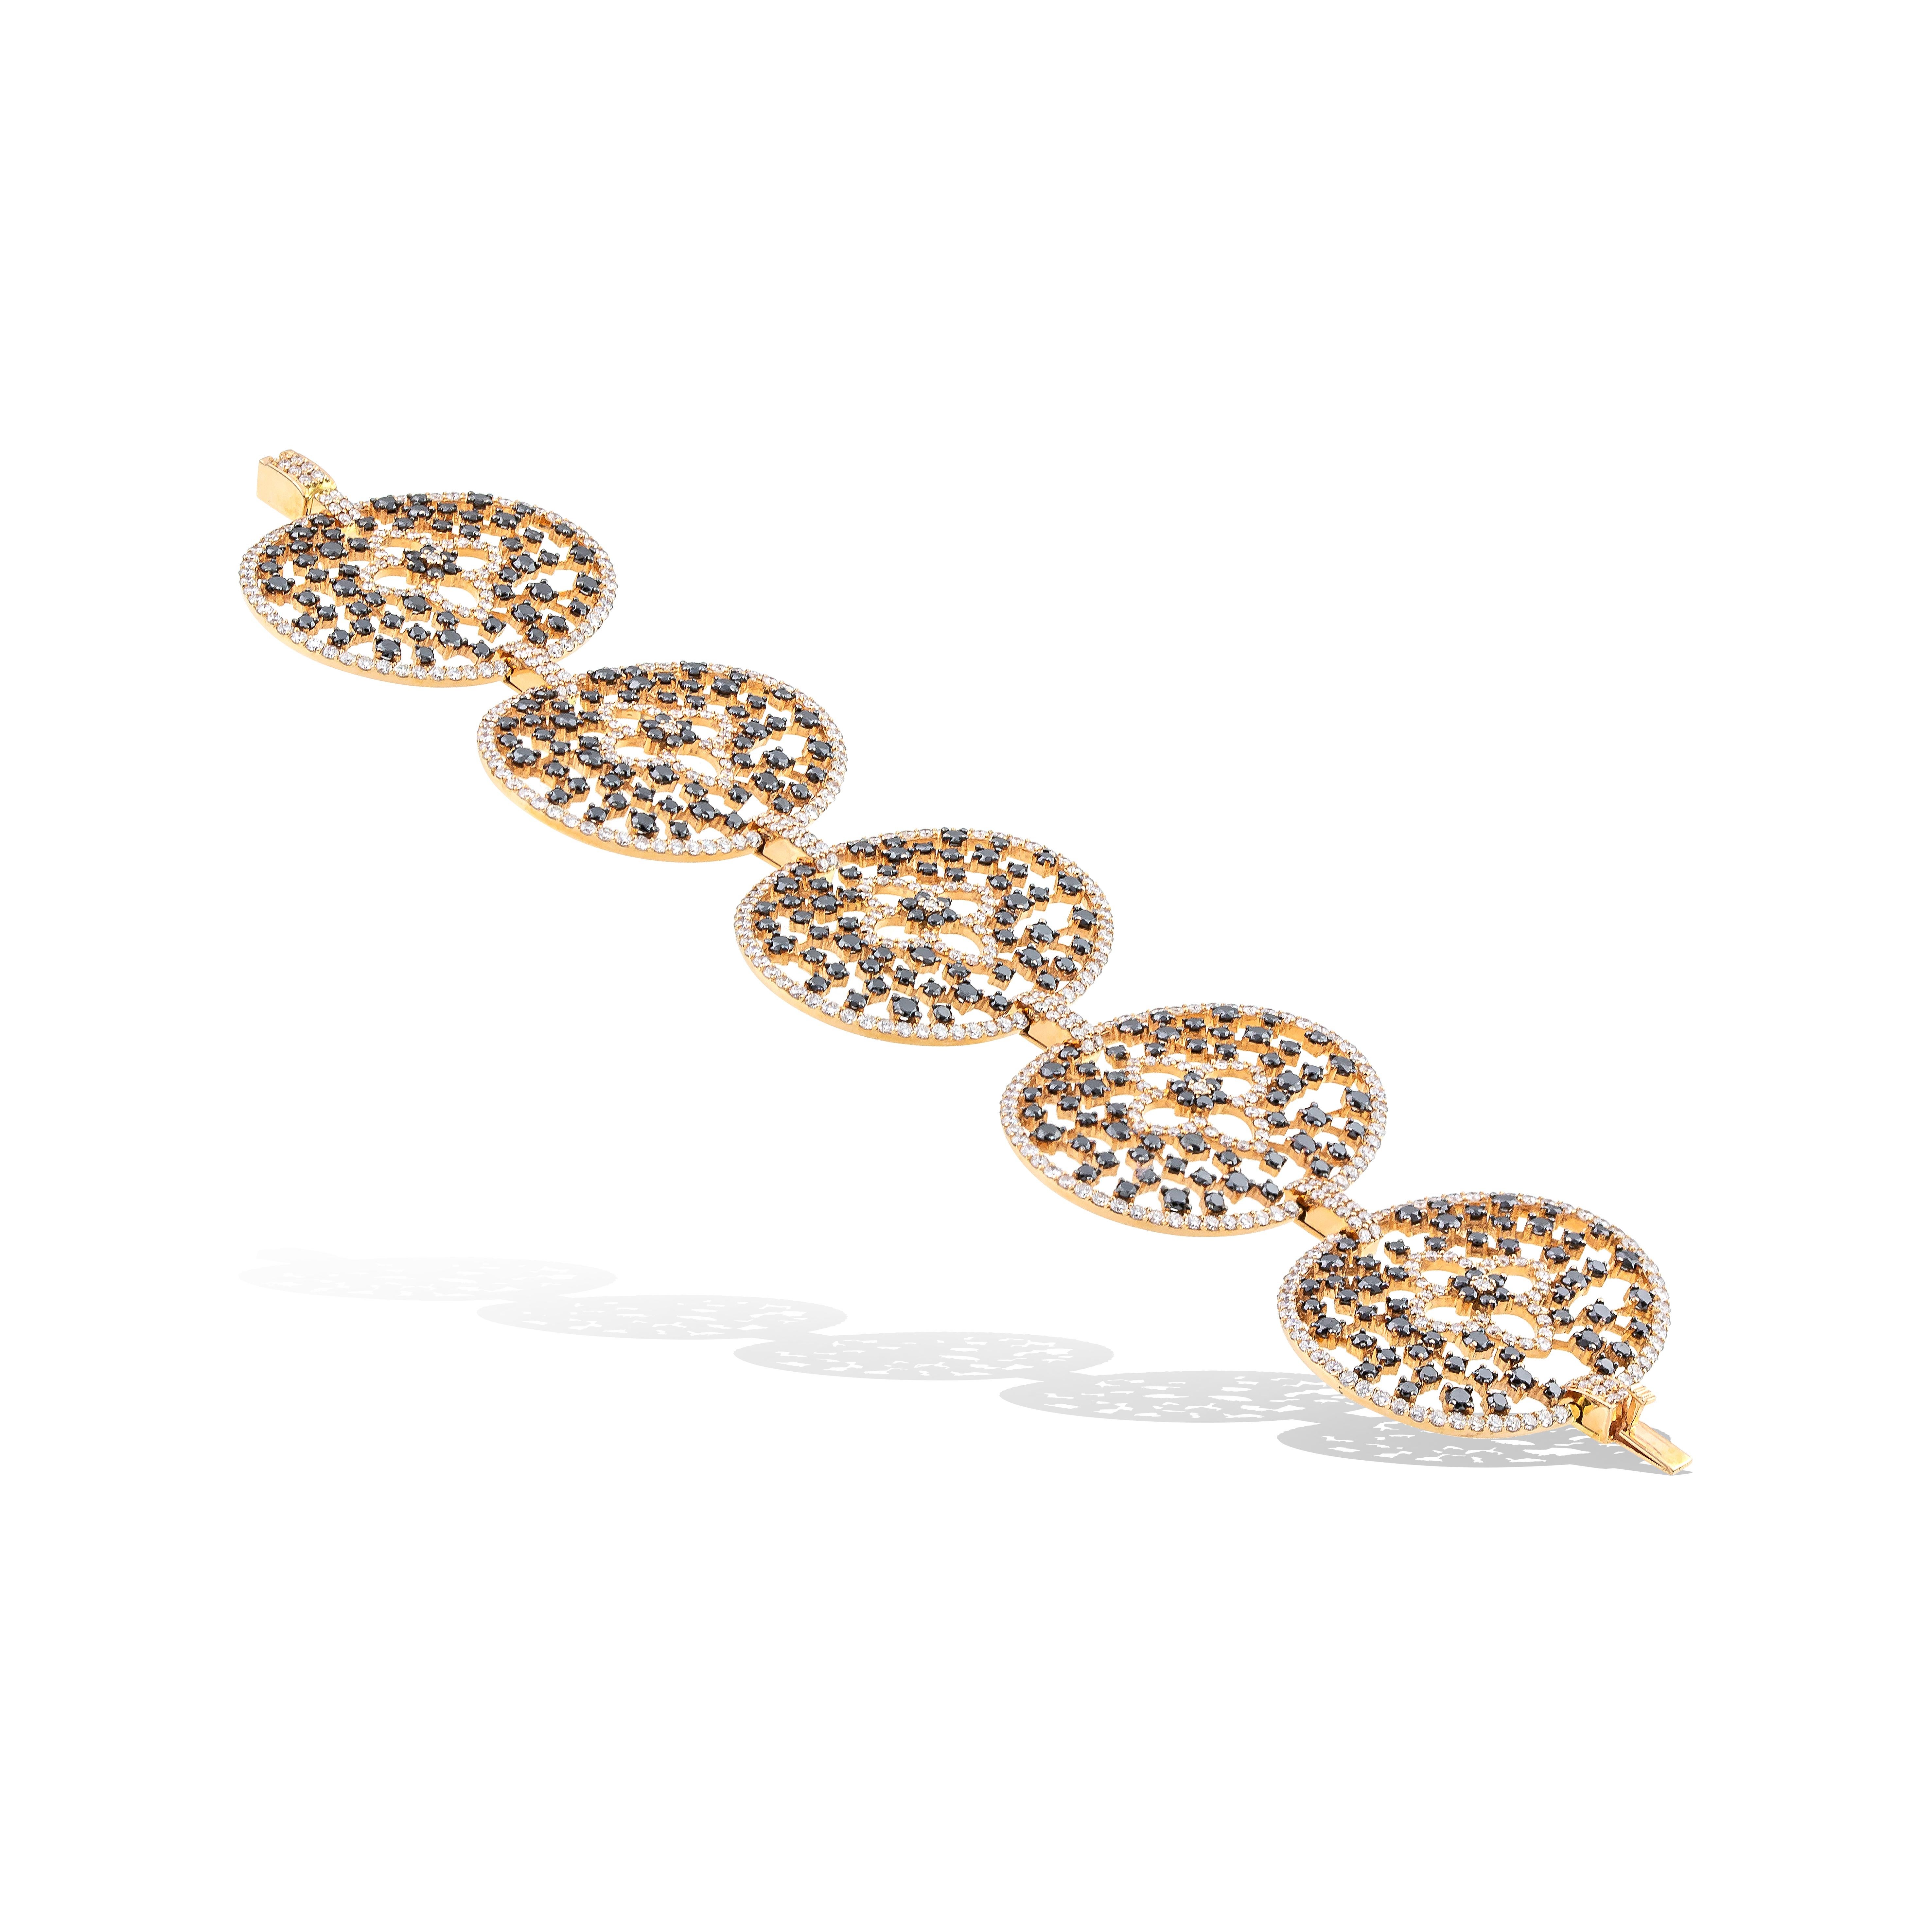 Unique Statement Cuff Flower Bracelet with 830 in total black and white brilliant cut diamonds handcrafted in 18Kt yellow gold. 
Five oval pieces with white diamonds around them and black diamonds inside them create the elegant shilouete of this